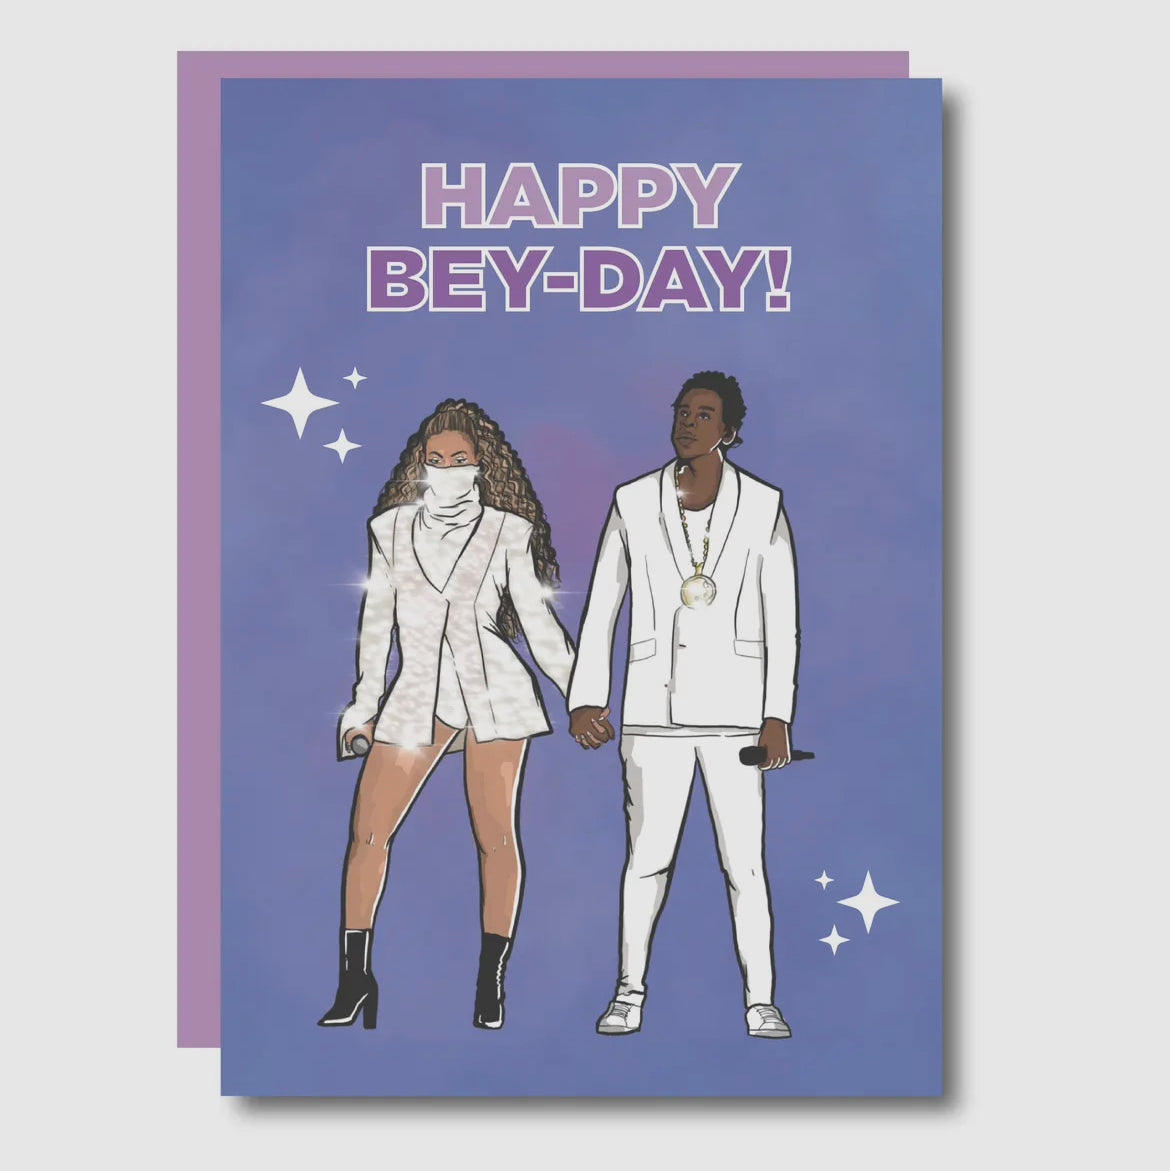 Happy Bey-Day Card